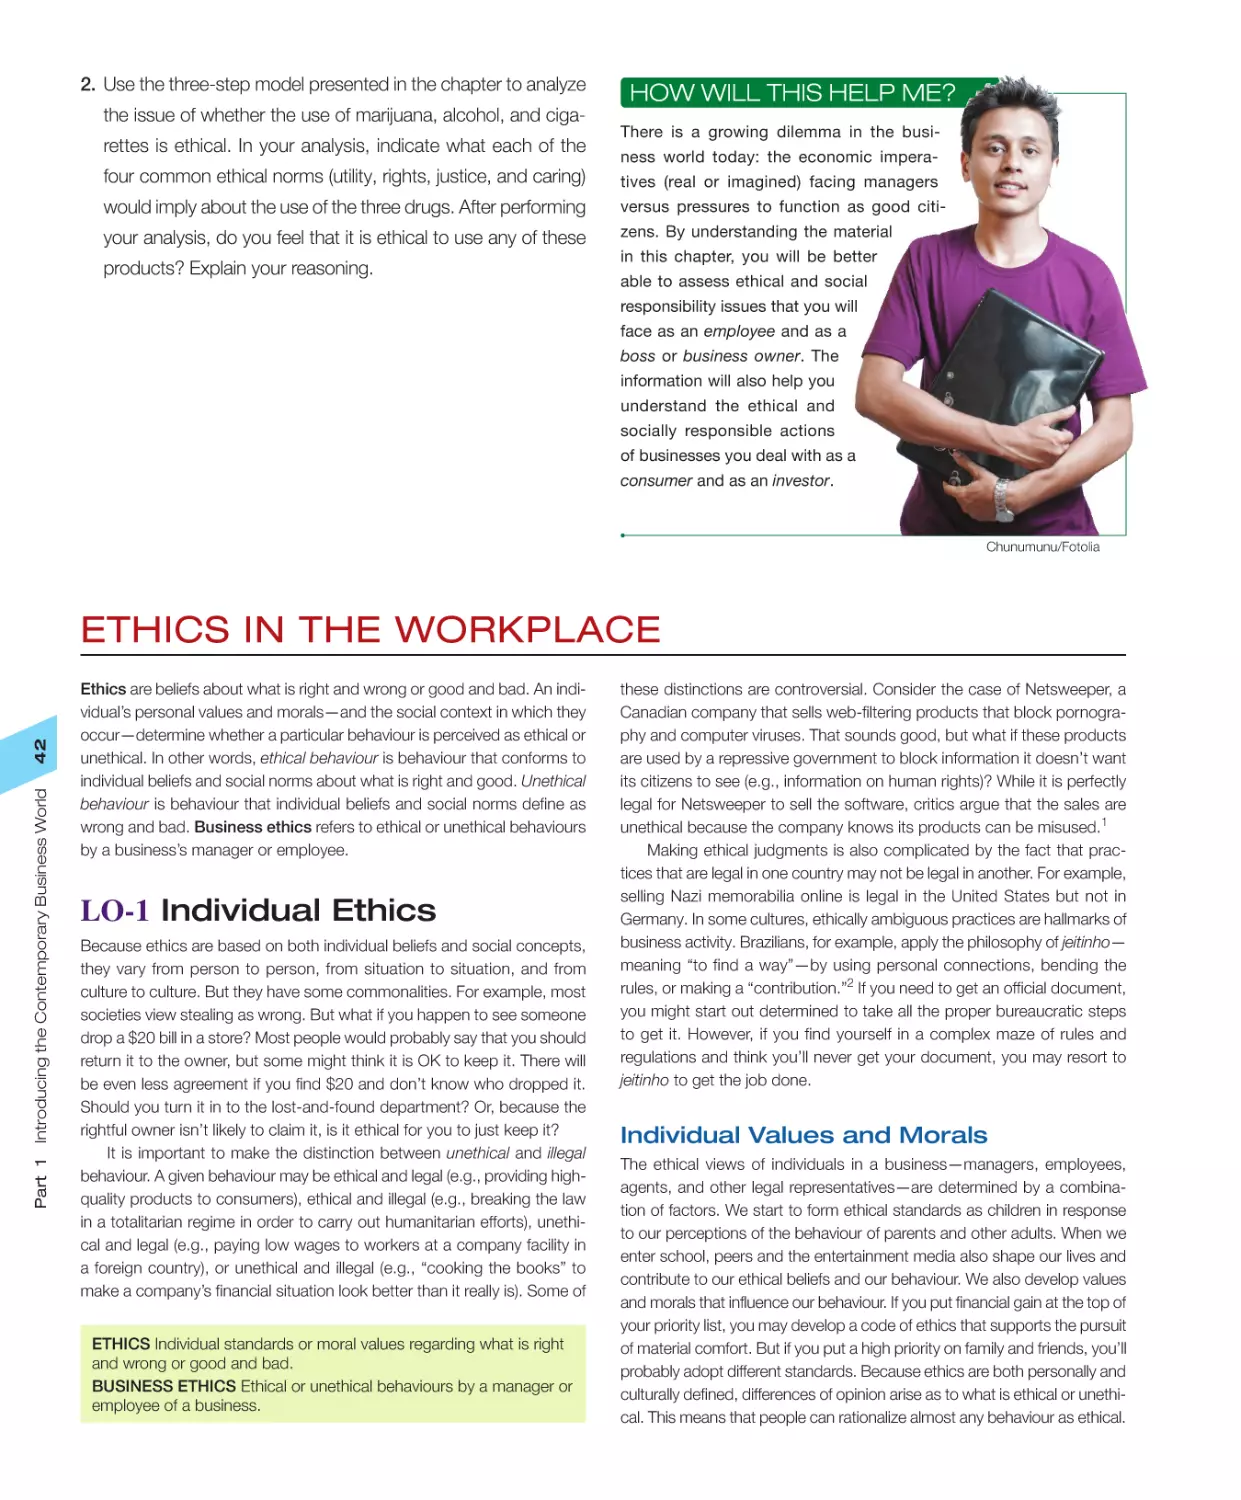 Ethics in the Workplace
LO‐1 Individual Ethics